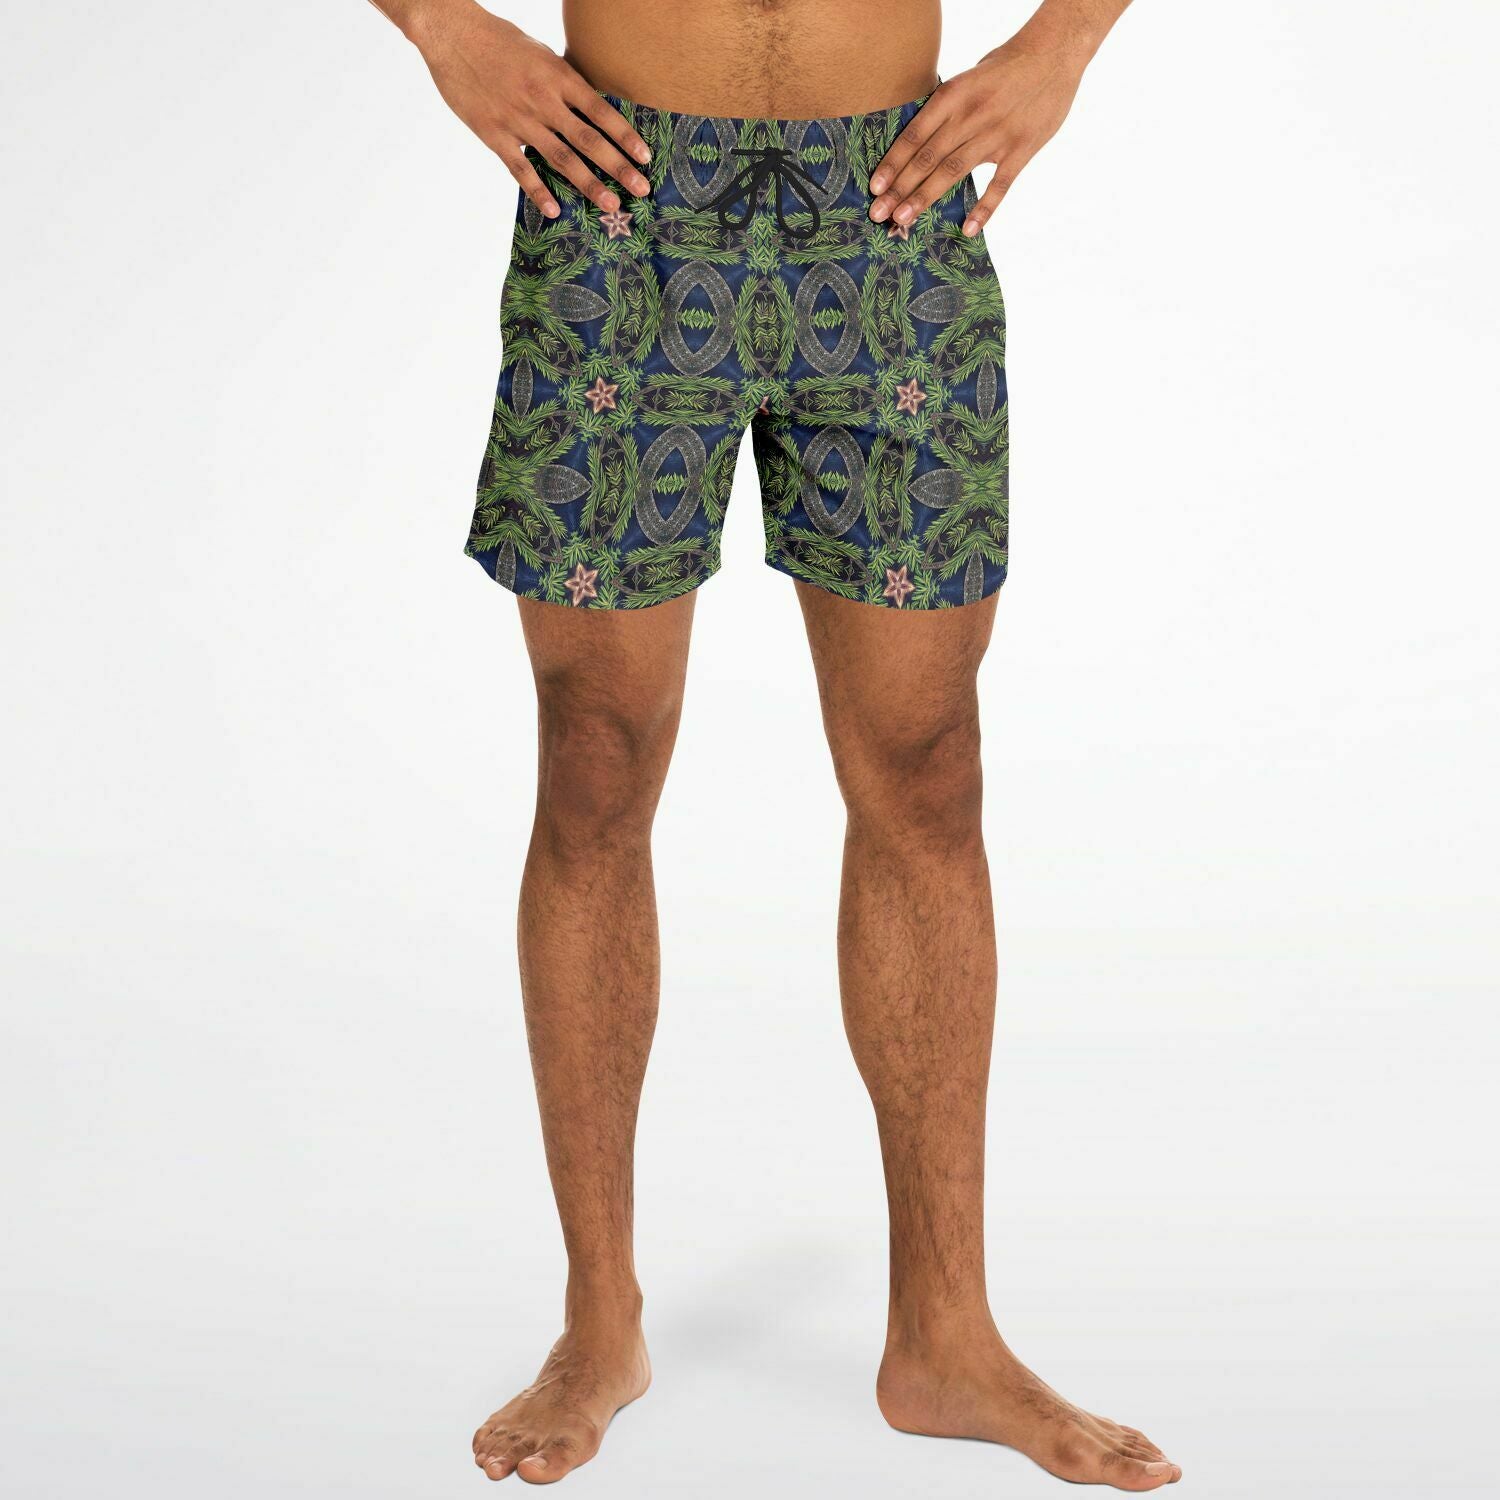 stylish mens swim suit in black with a foresty print